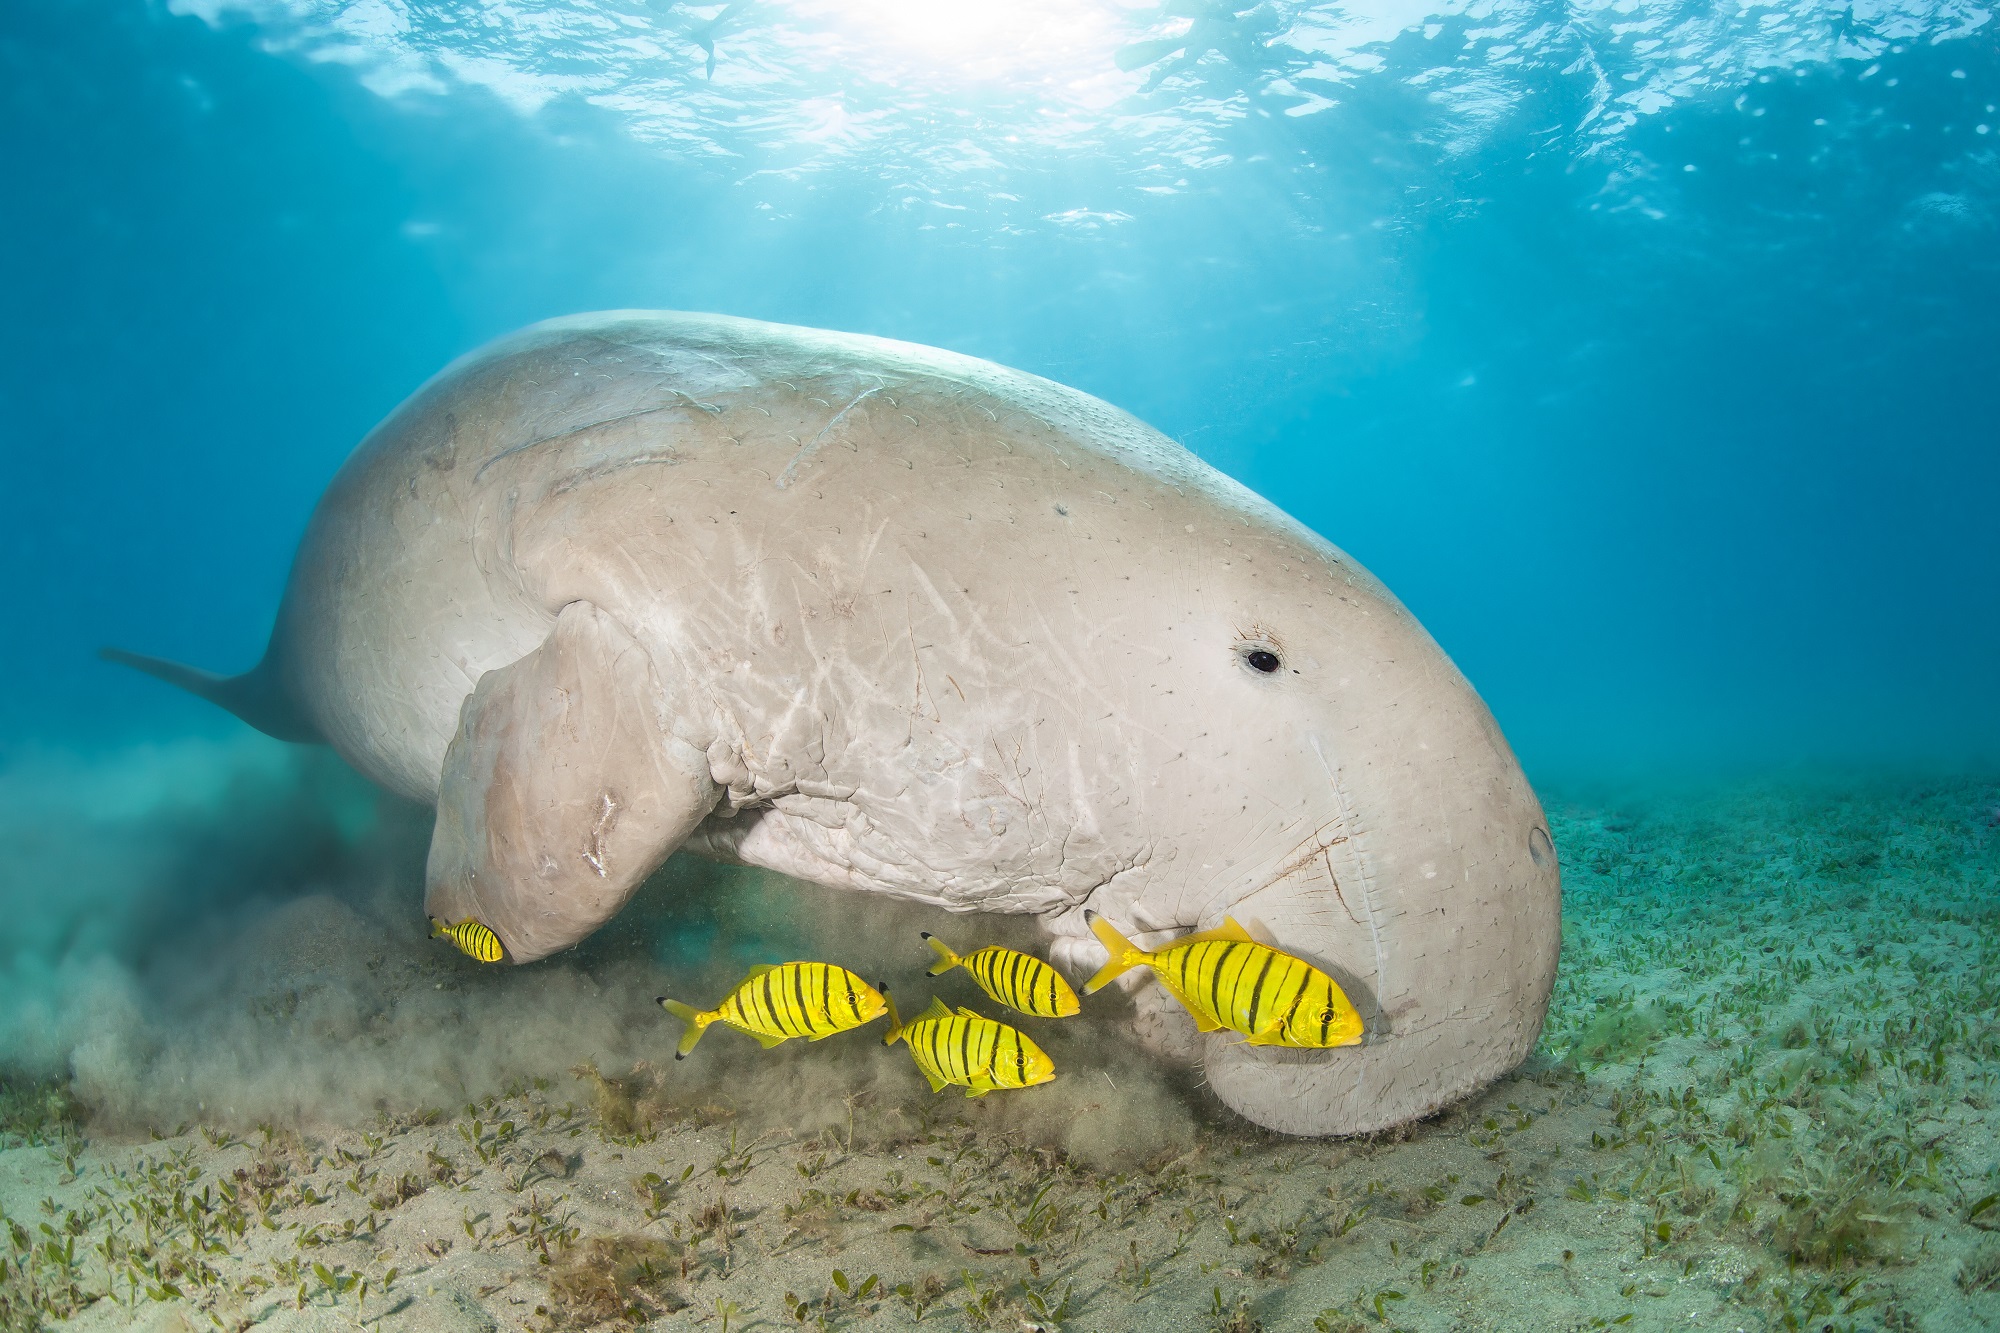 A gentle dugong feeding in the seagrass, and a popular sight while enjoying a vacation in New Caledonia or Vanuatu